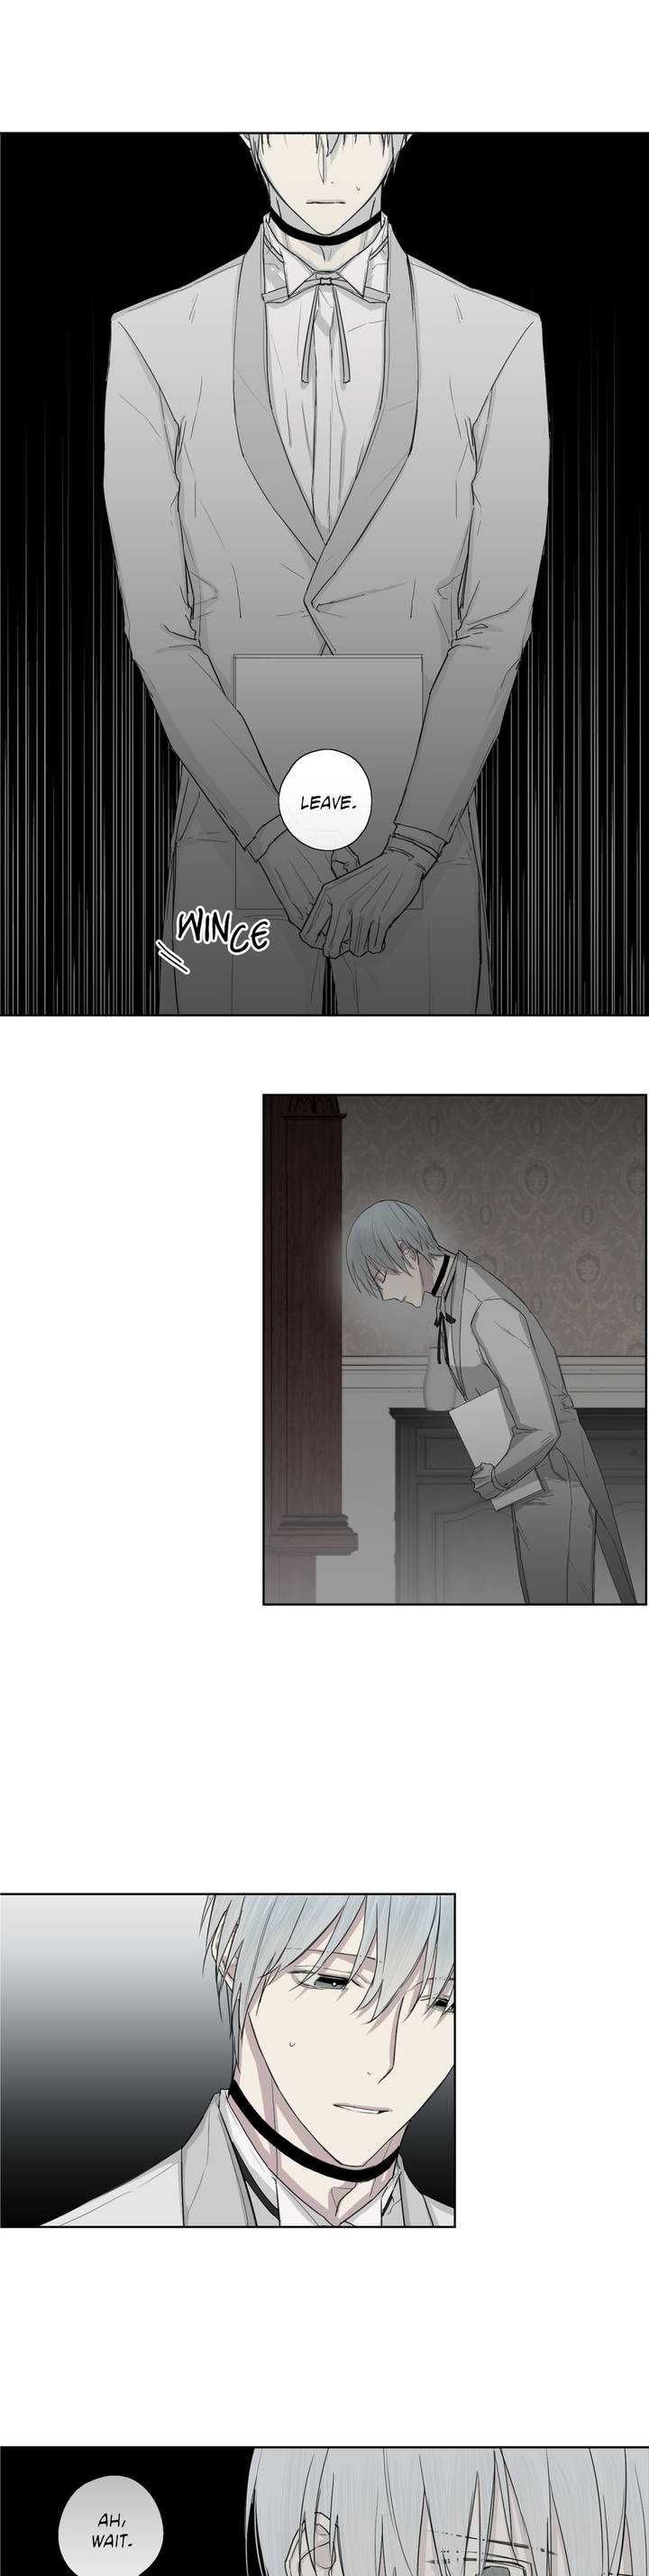 Royal Servant - Chapter 0 Page 3